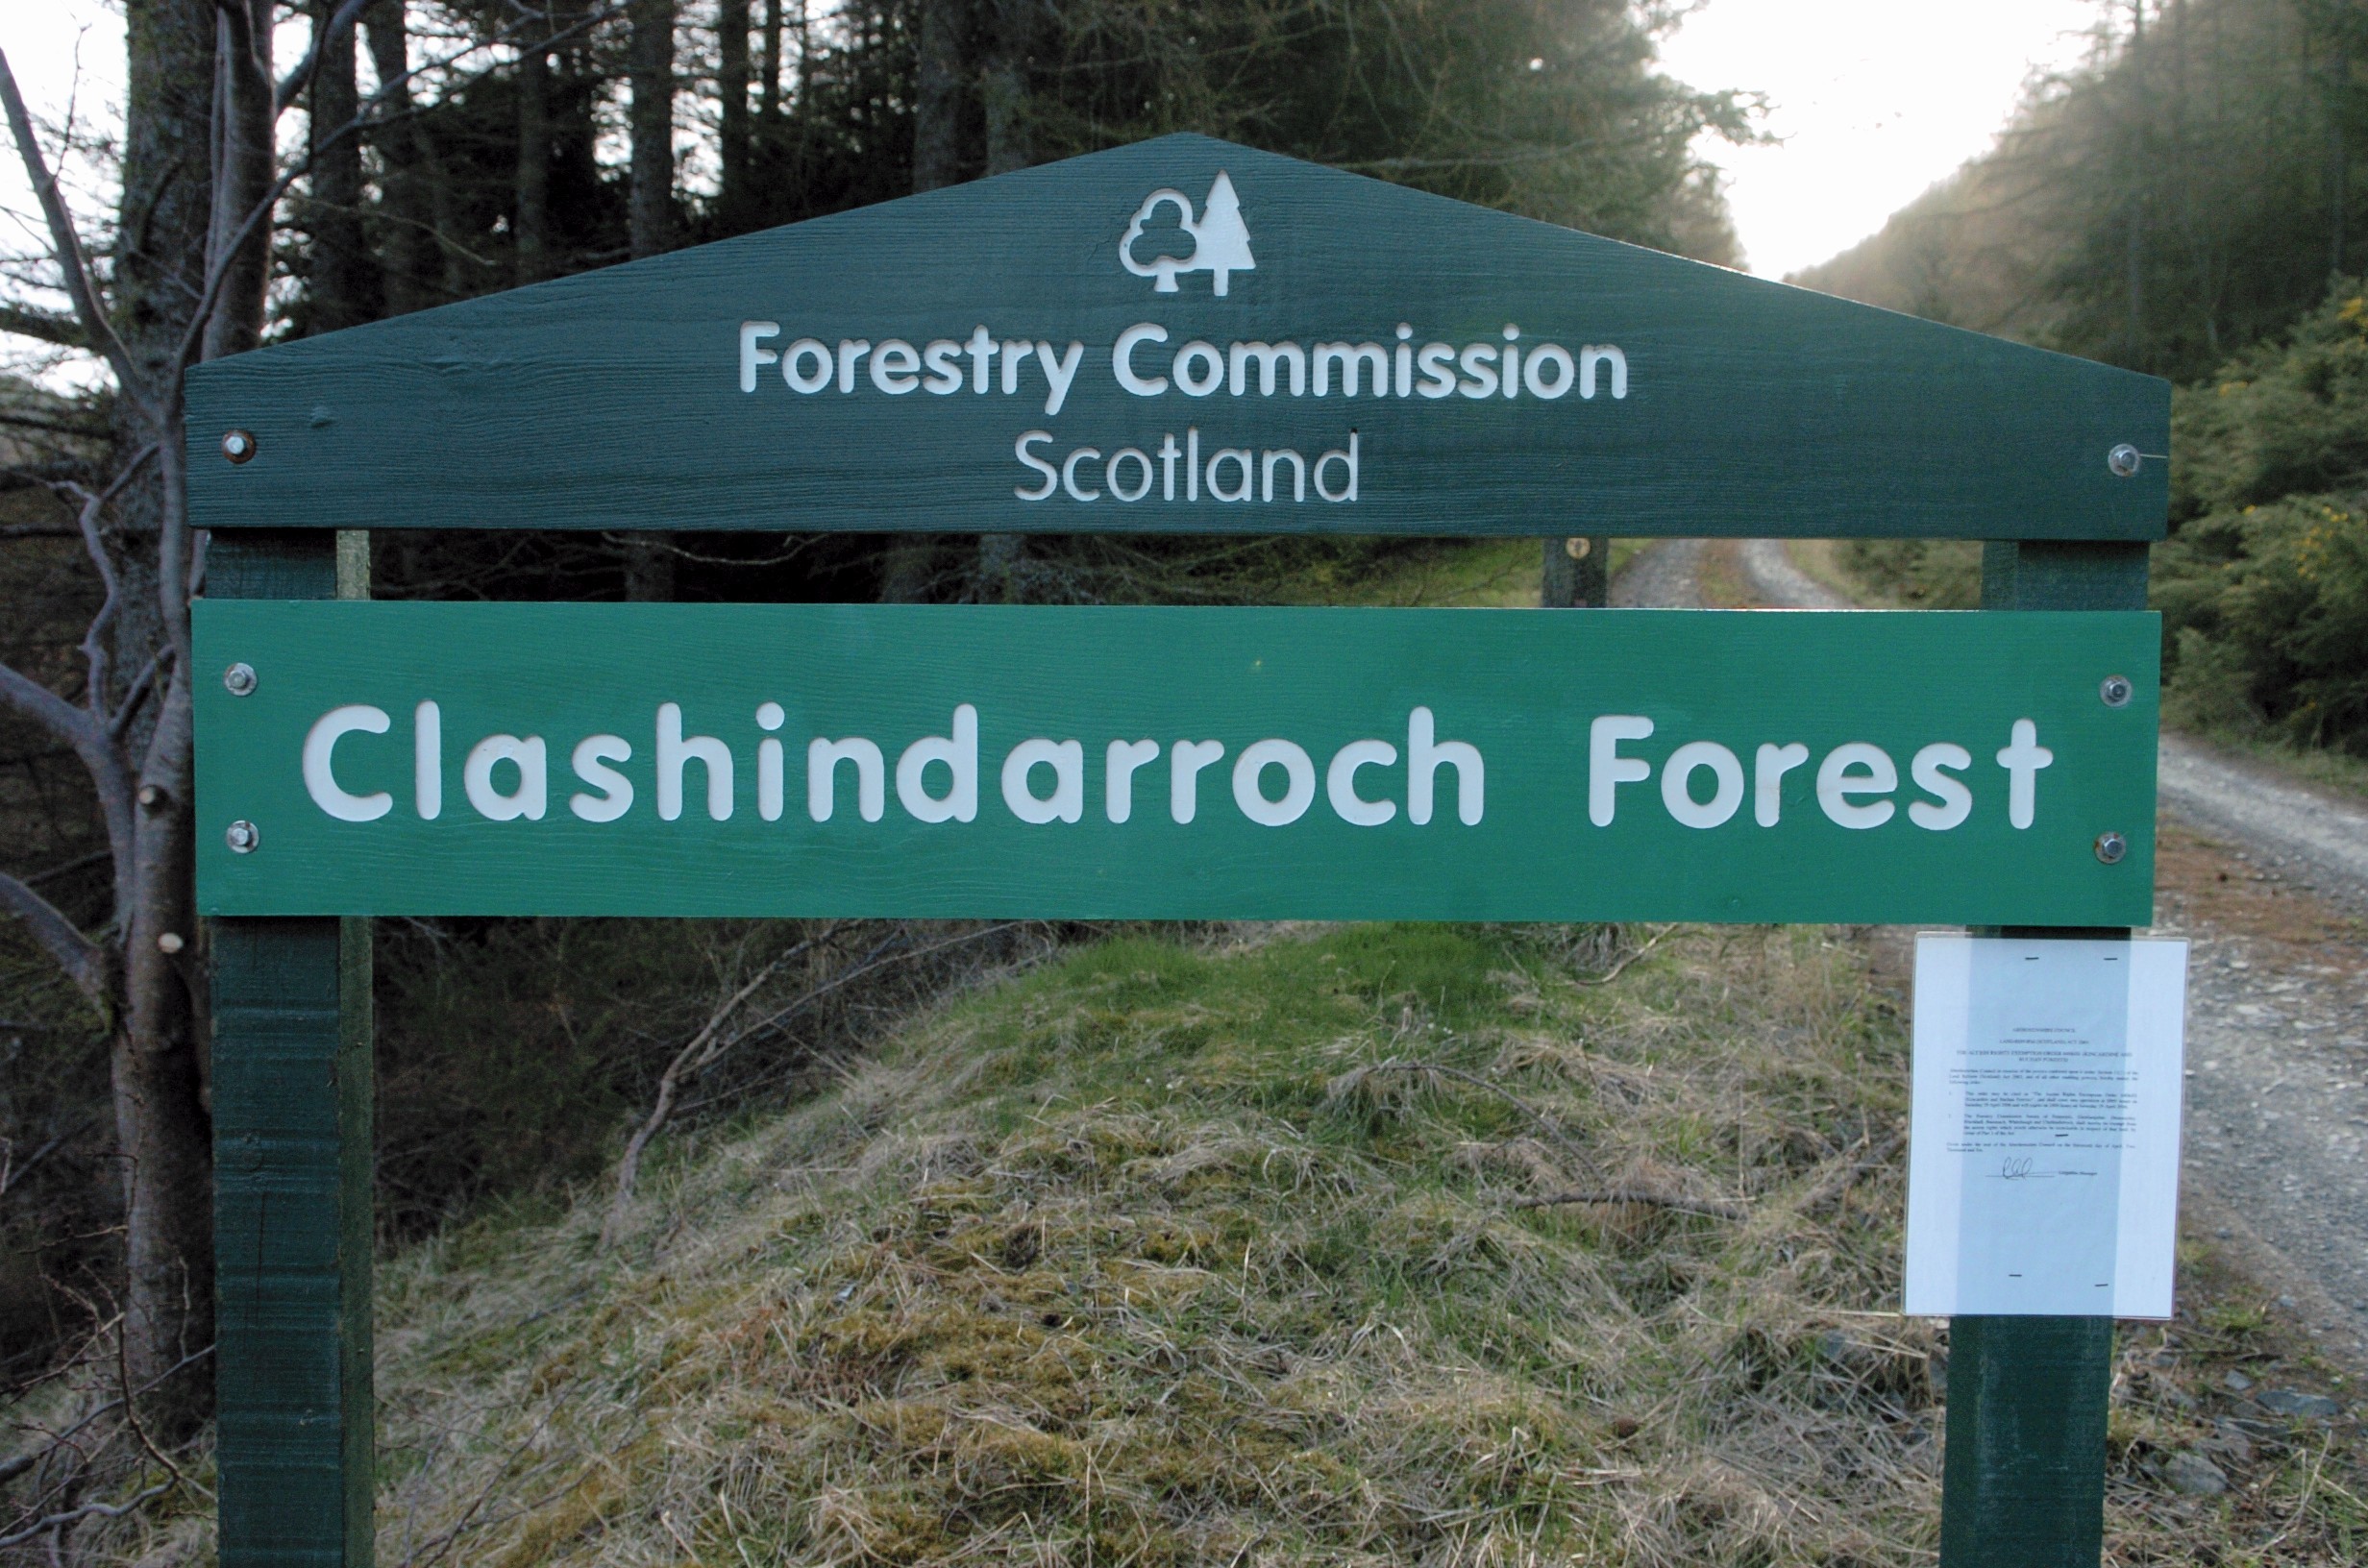 Clashindarroch Forest. Photograph: Peter Anderson